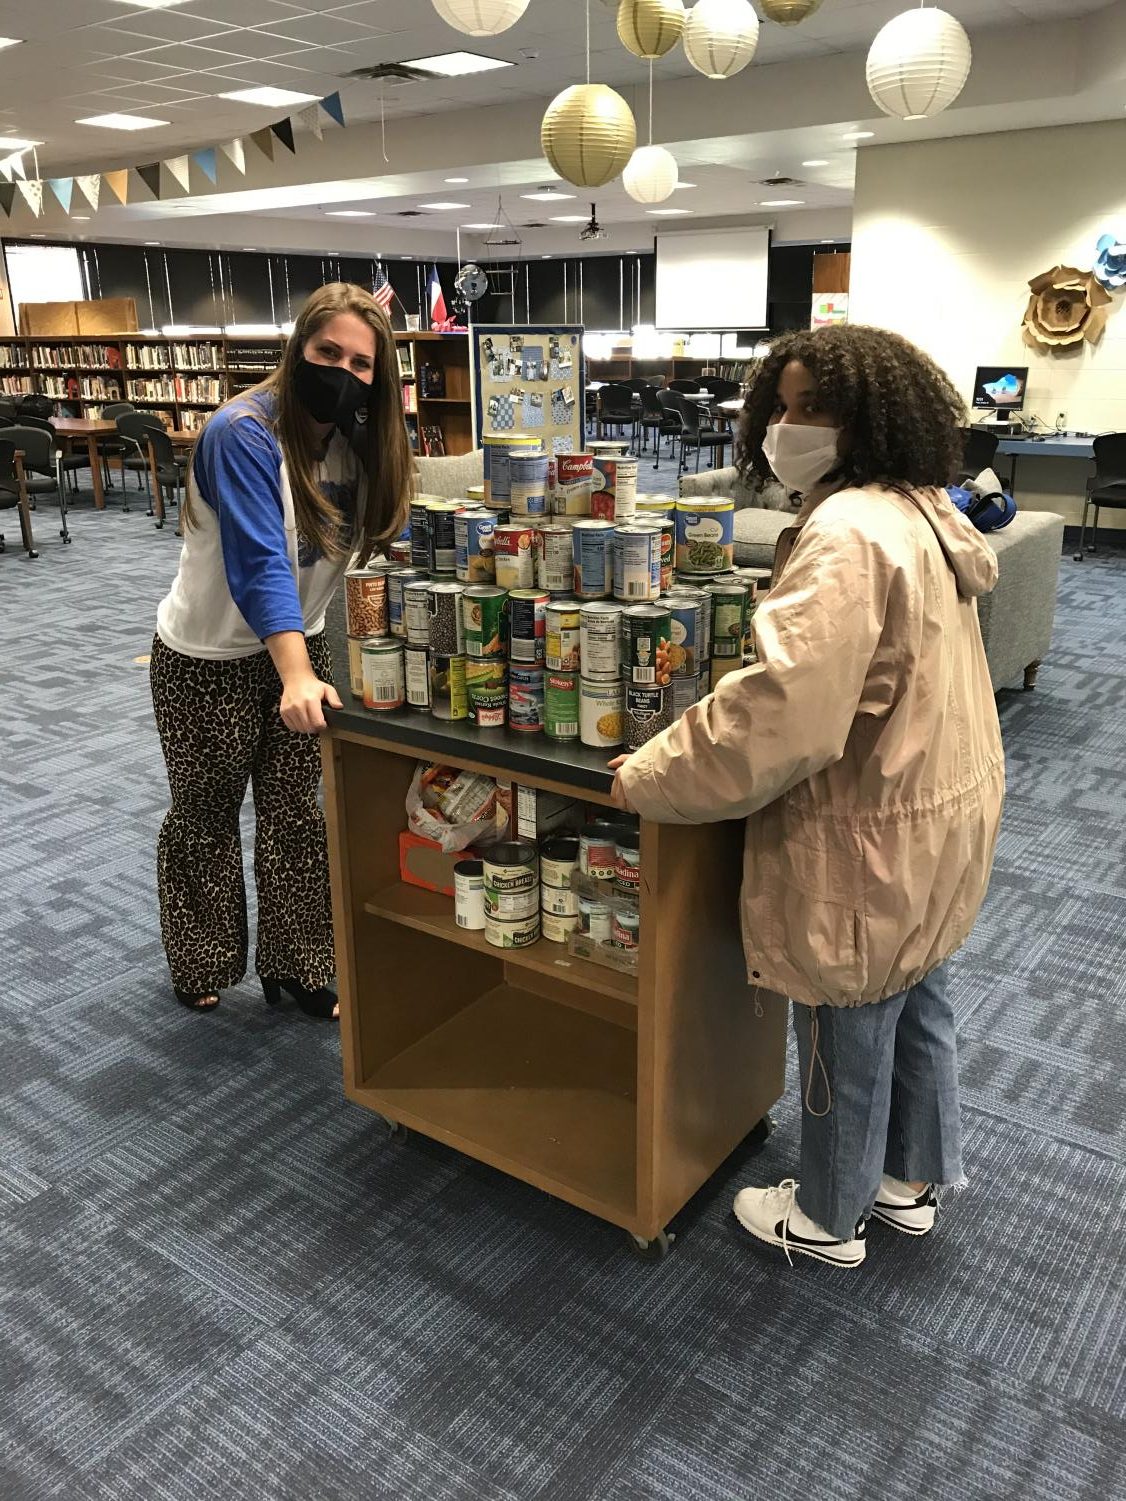 Members of the student council loads cans to transport to the David Powell Food Pantry. All cans will be donated to the pantry and distributed to families in need.